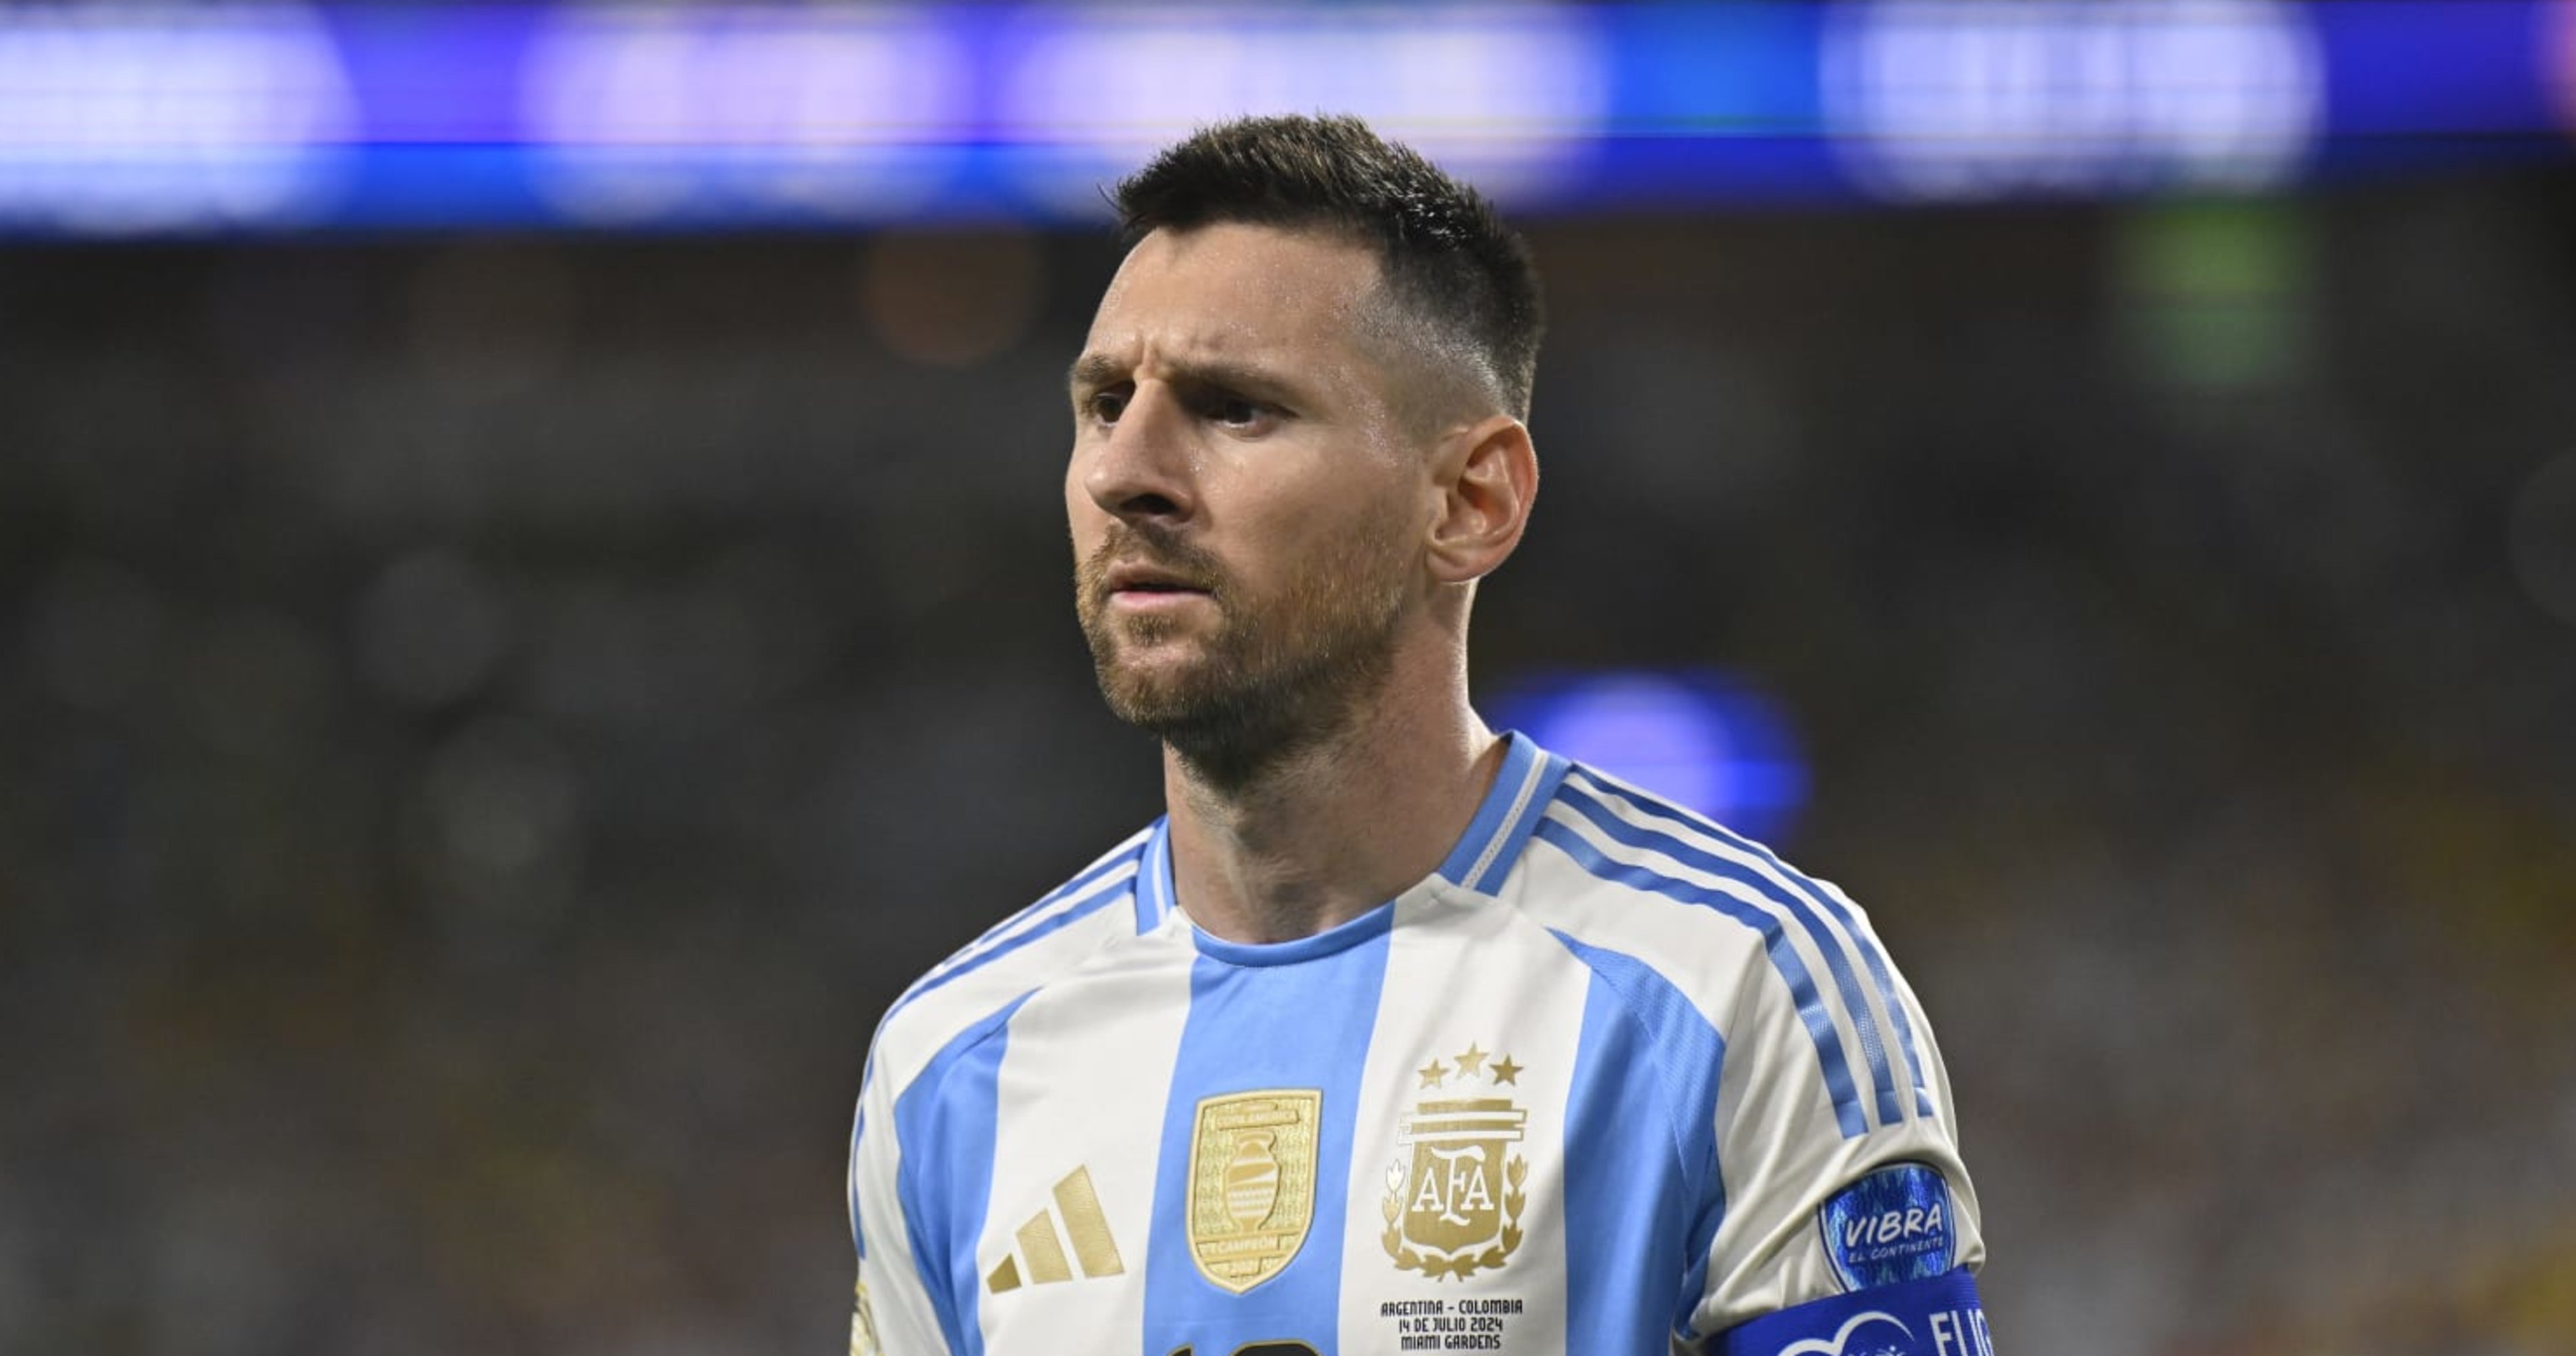 Lionel Messi Suffered Ligament Injury in Ankle in Copa America Final; Timetable TBD